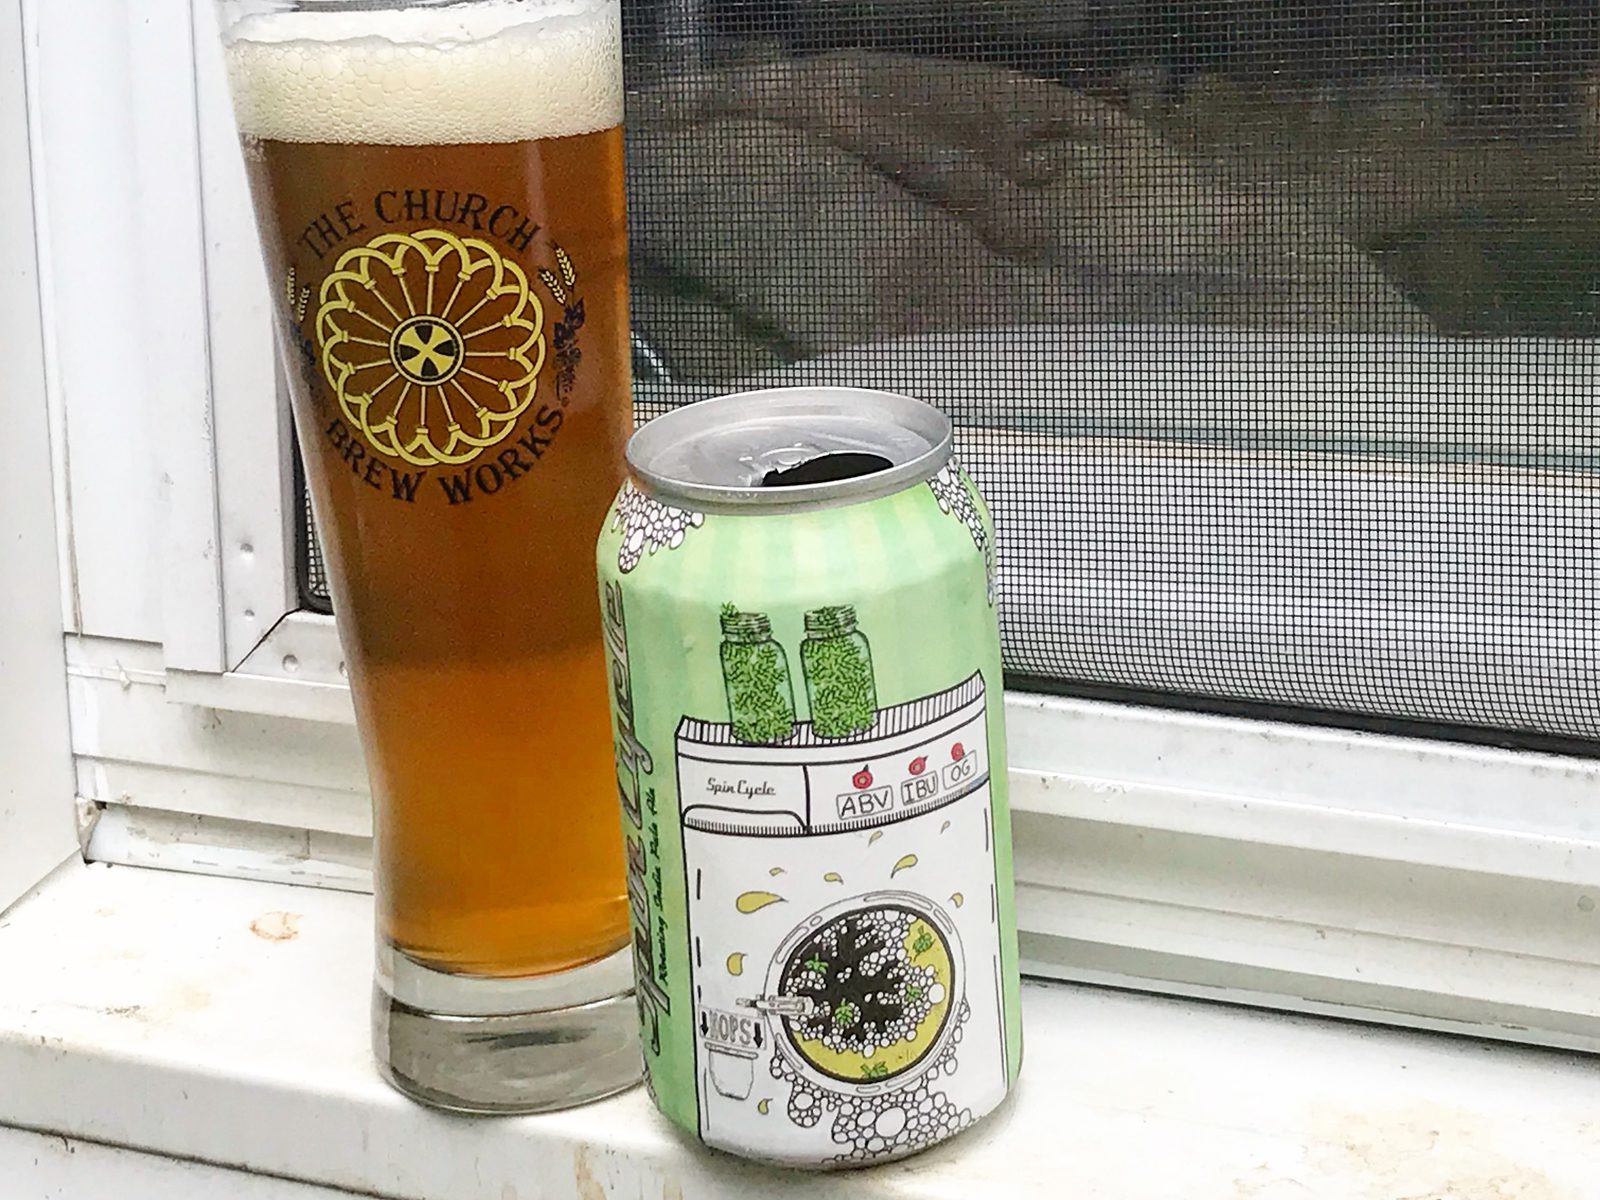 New England Brewing Company: Spin Cycle #3